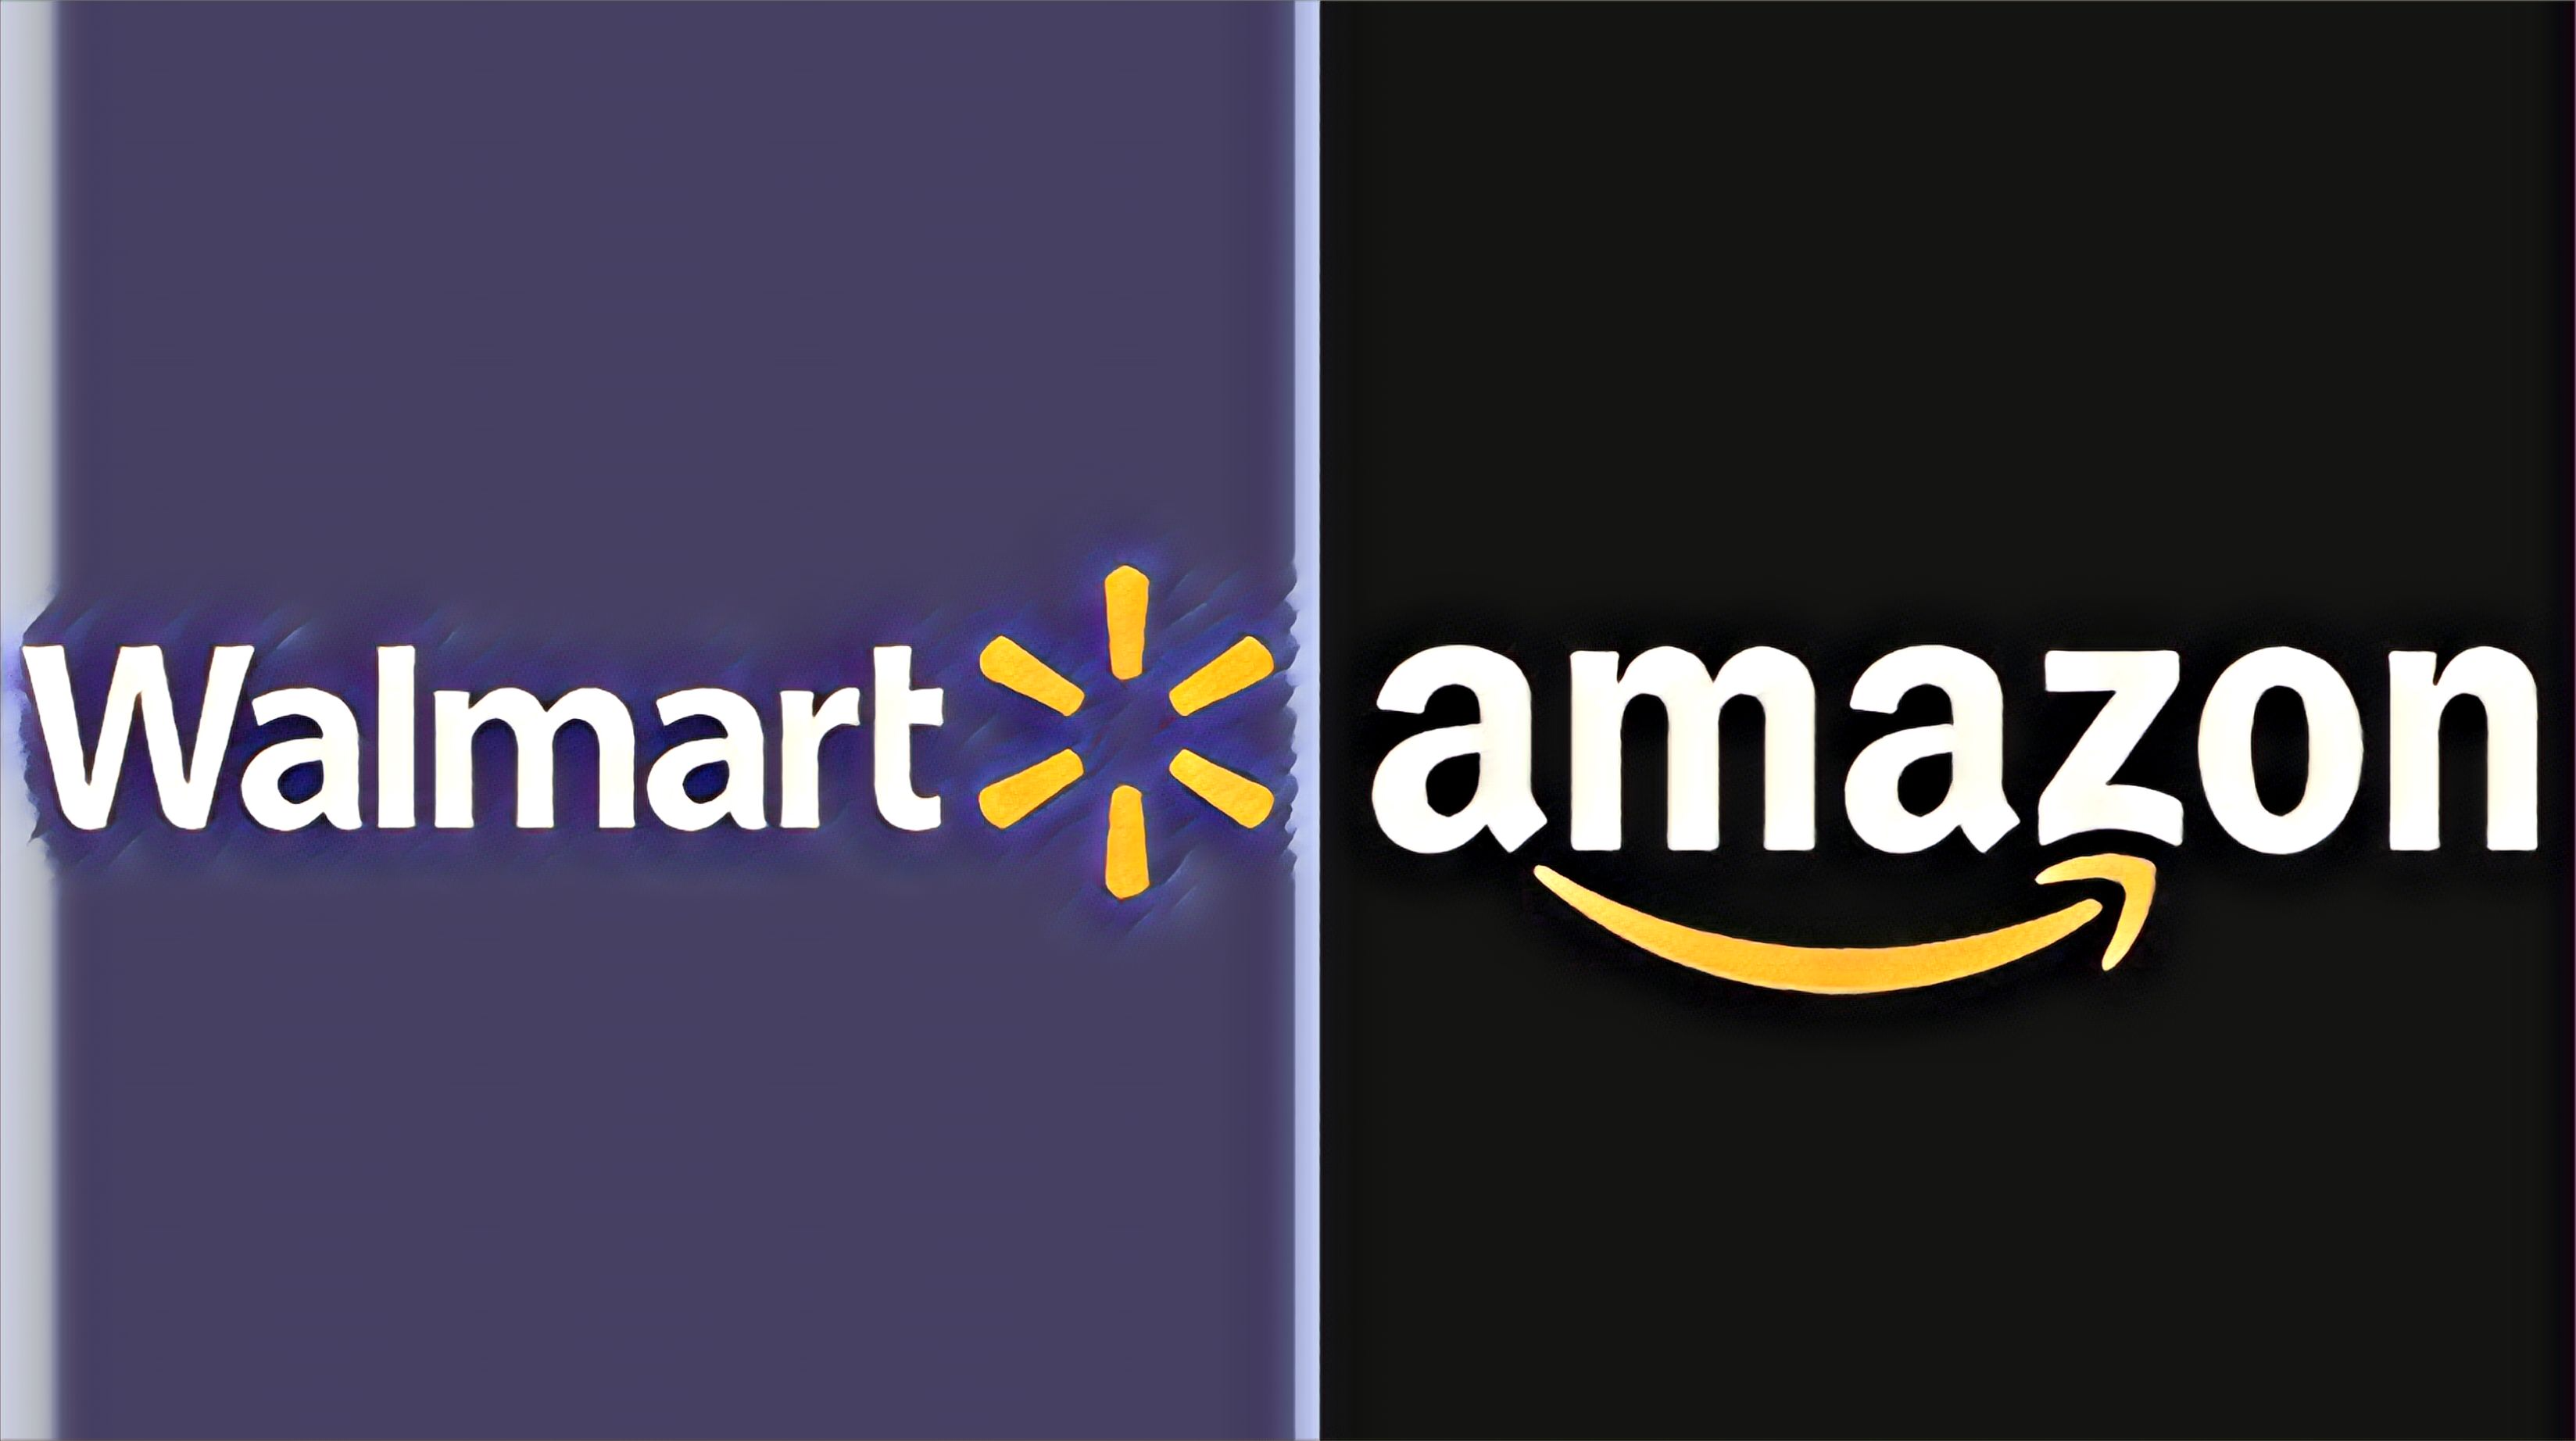 Amazon and Walmart’s rivalry how we’ll buy everything Technology